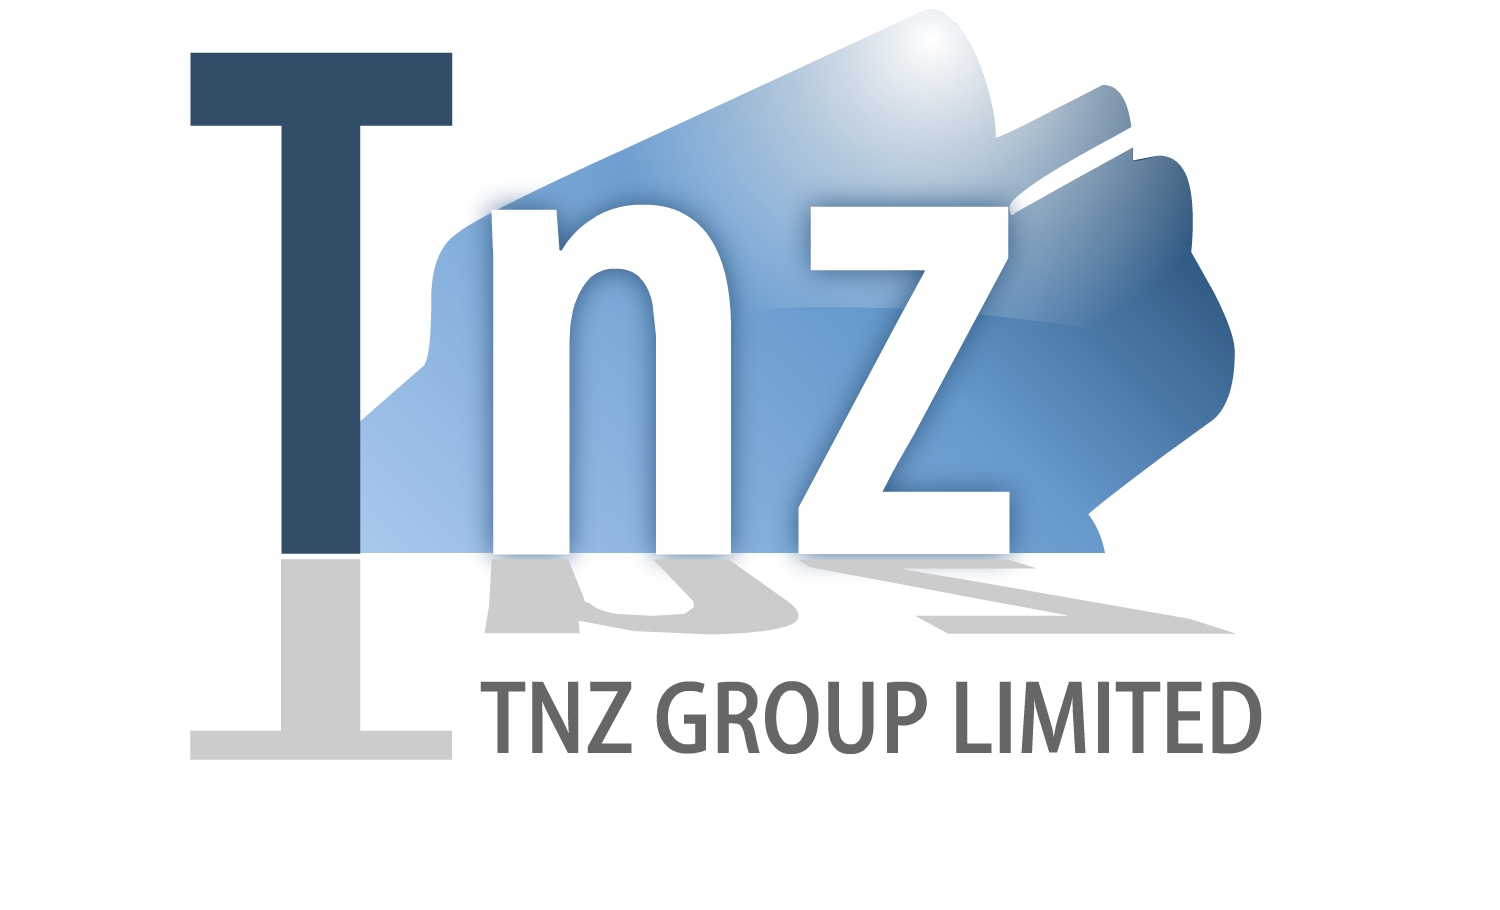 TNZ Group Limited